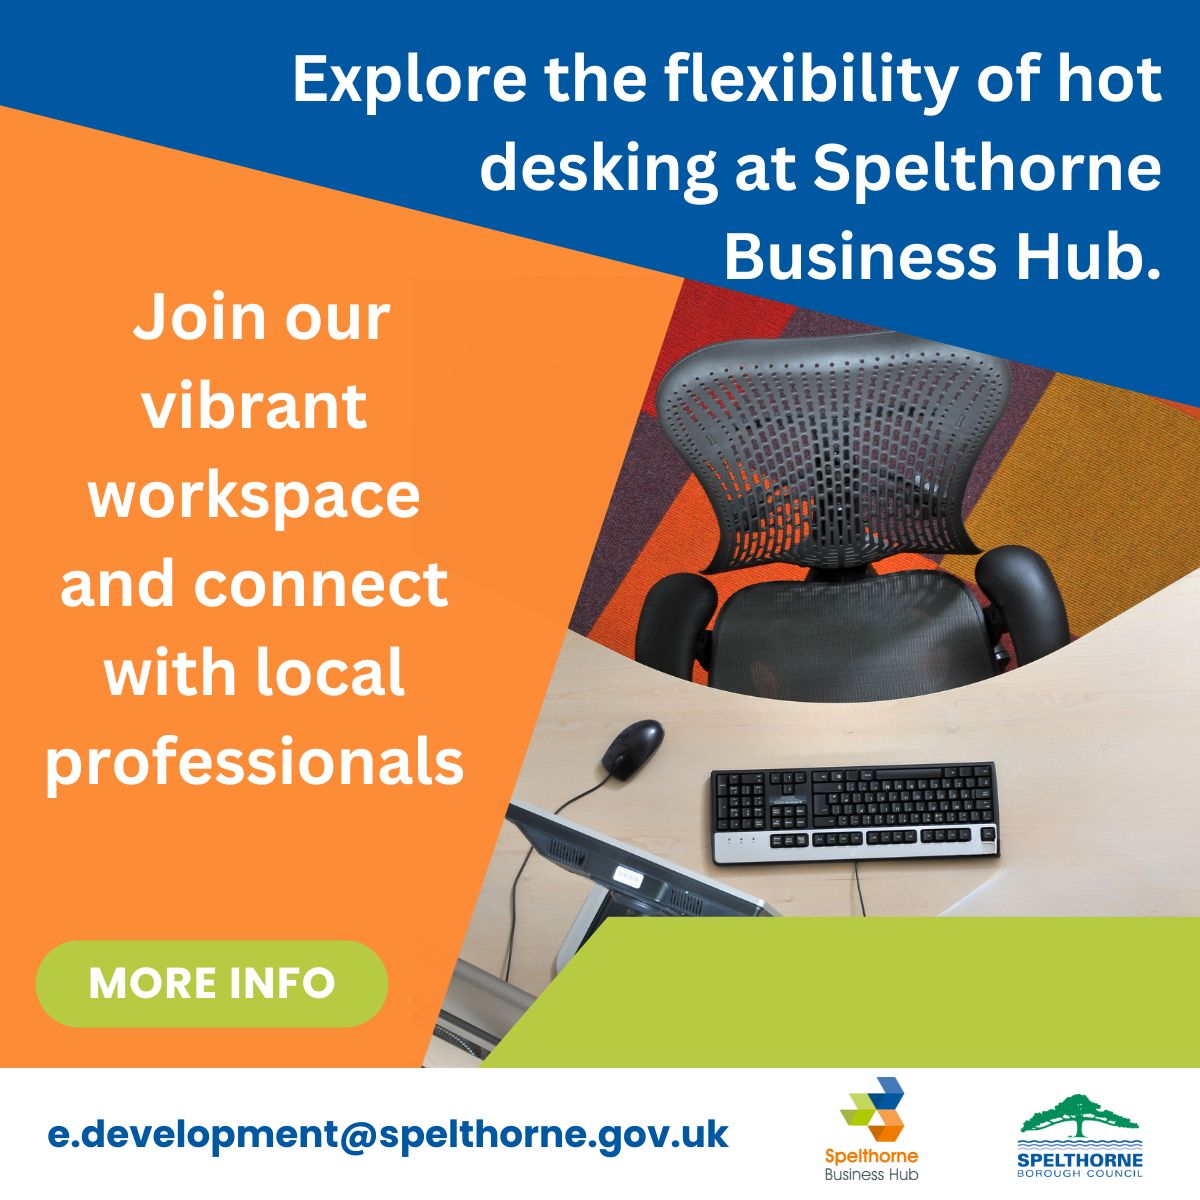 Experience the benefits of hot desking in coworking spaces: •Flexibility •Collaboration •Cost-effectiveness •Productivity Spelthorne Business Hub 33 Hanworth Rd, Sunbury-on-Thames TW16 5DA #SpelthorneBusinessHub #SpelthorneBoroughCouncil #HotDesking